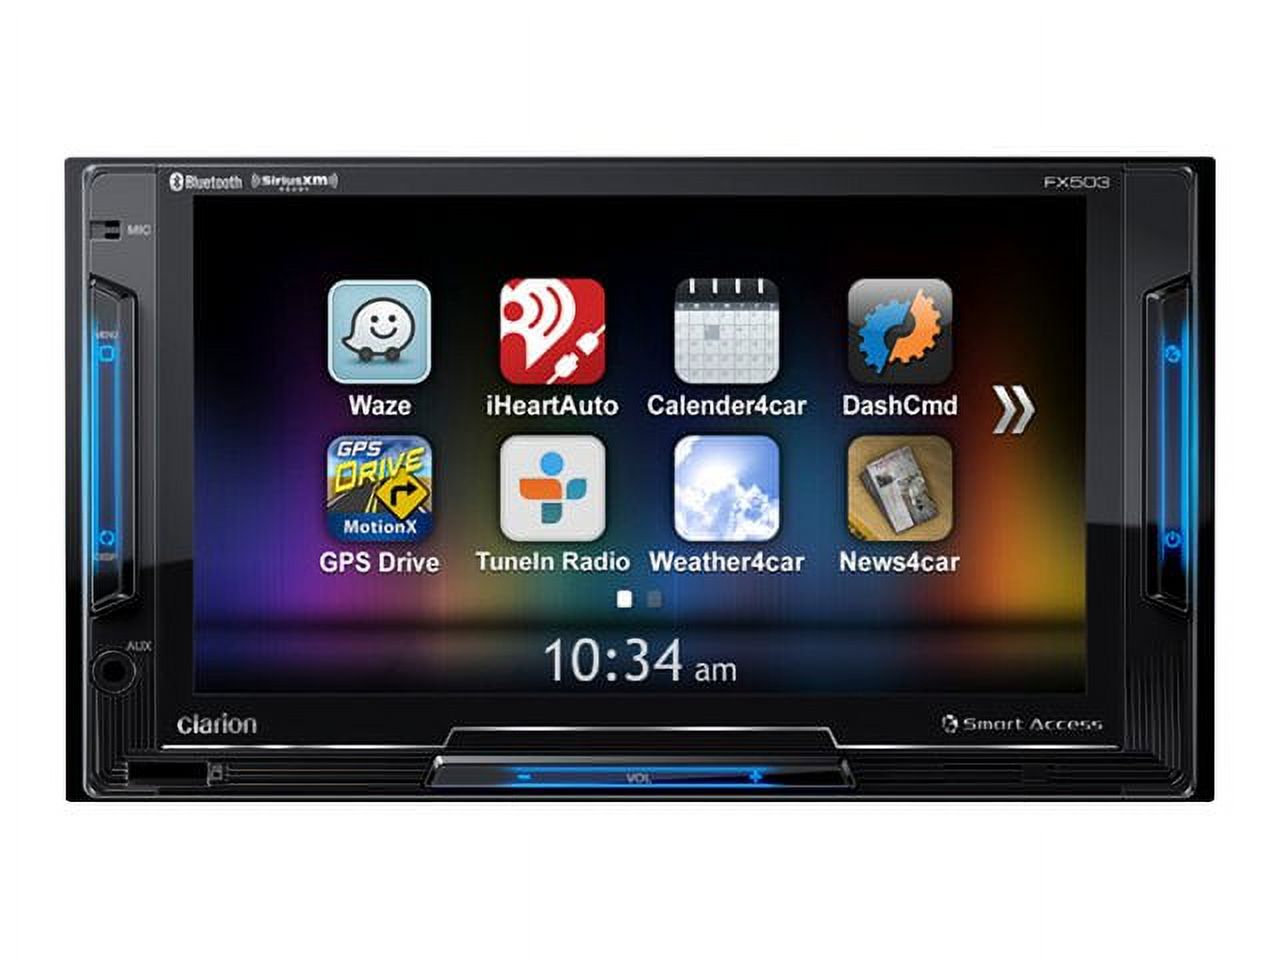 Clarion FX503 6.2" MP3 Touchscreen Bluetooth Car Stereo SiriusXm Radio Ready - image 1 of 3